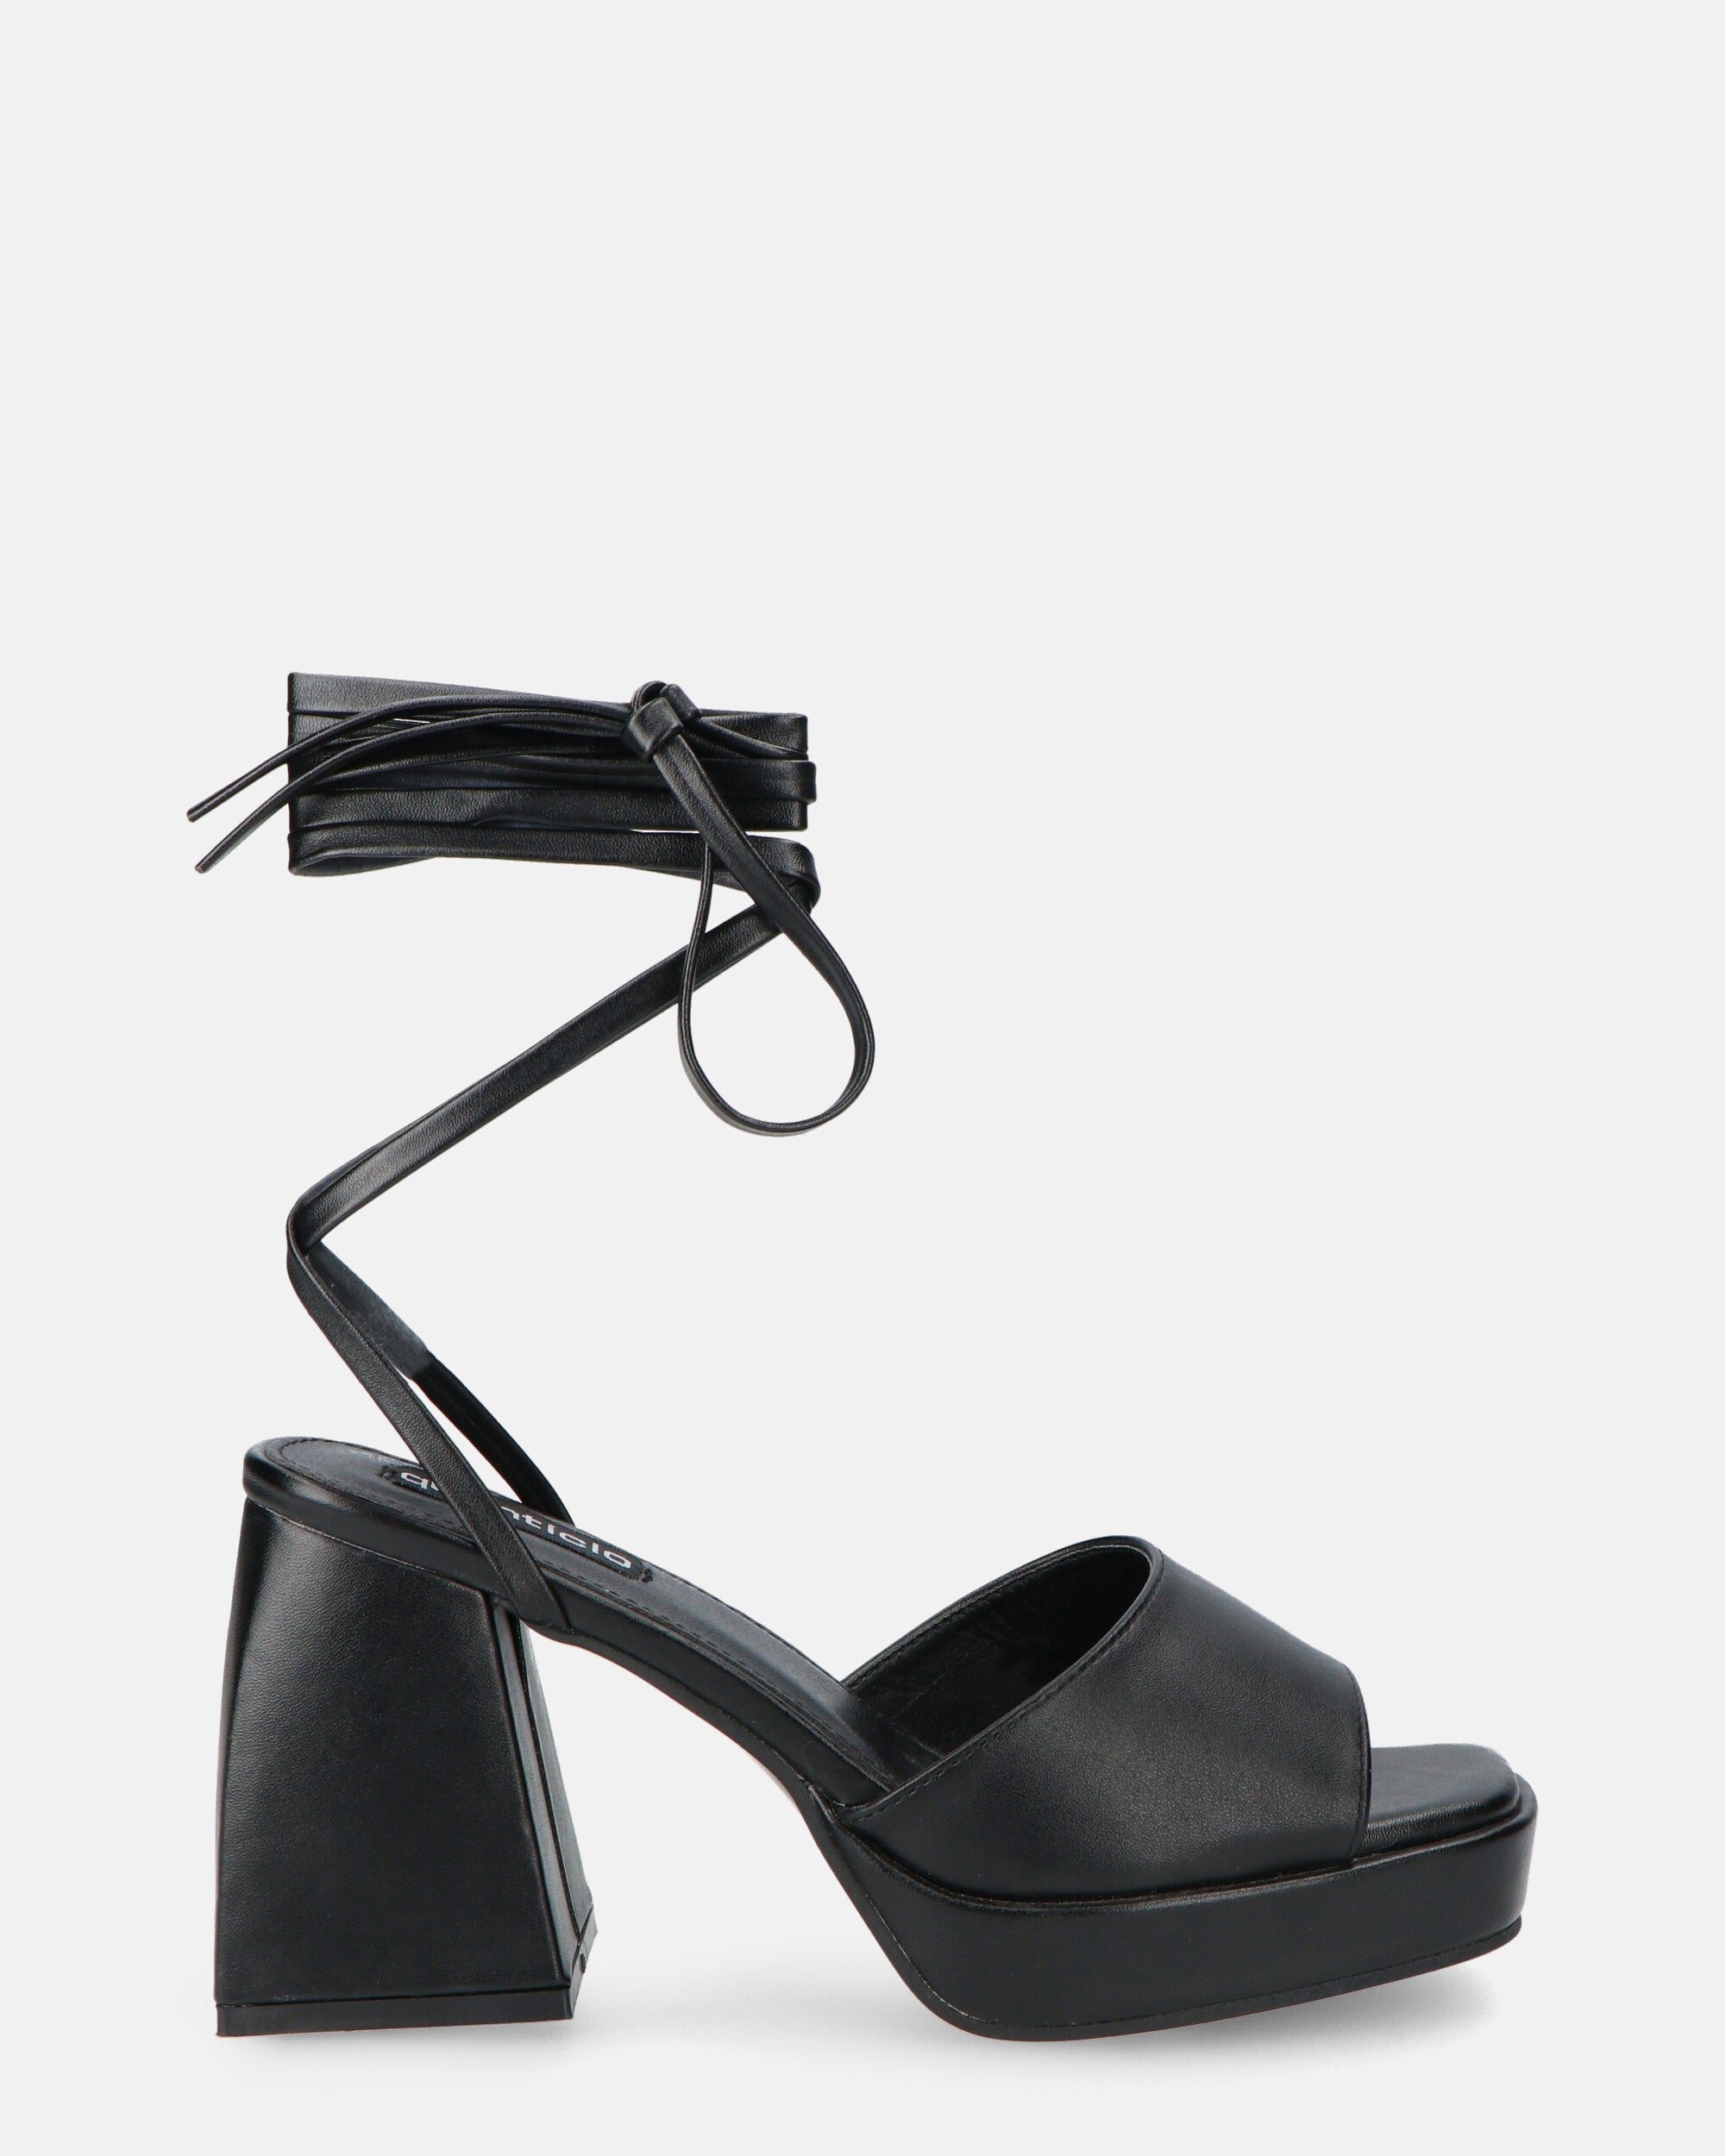 TOMI - sandals in black with laces and squared heel